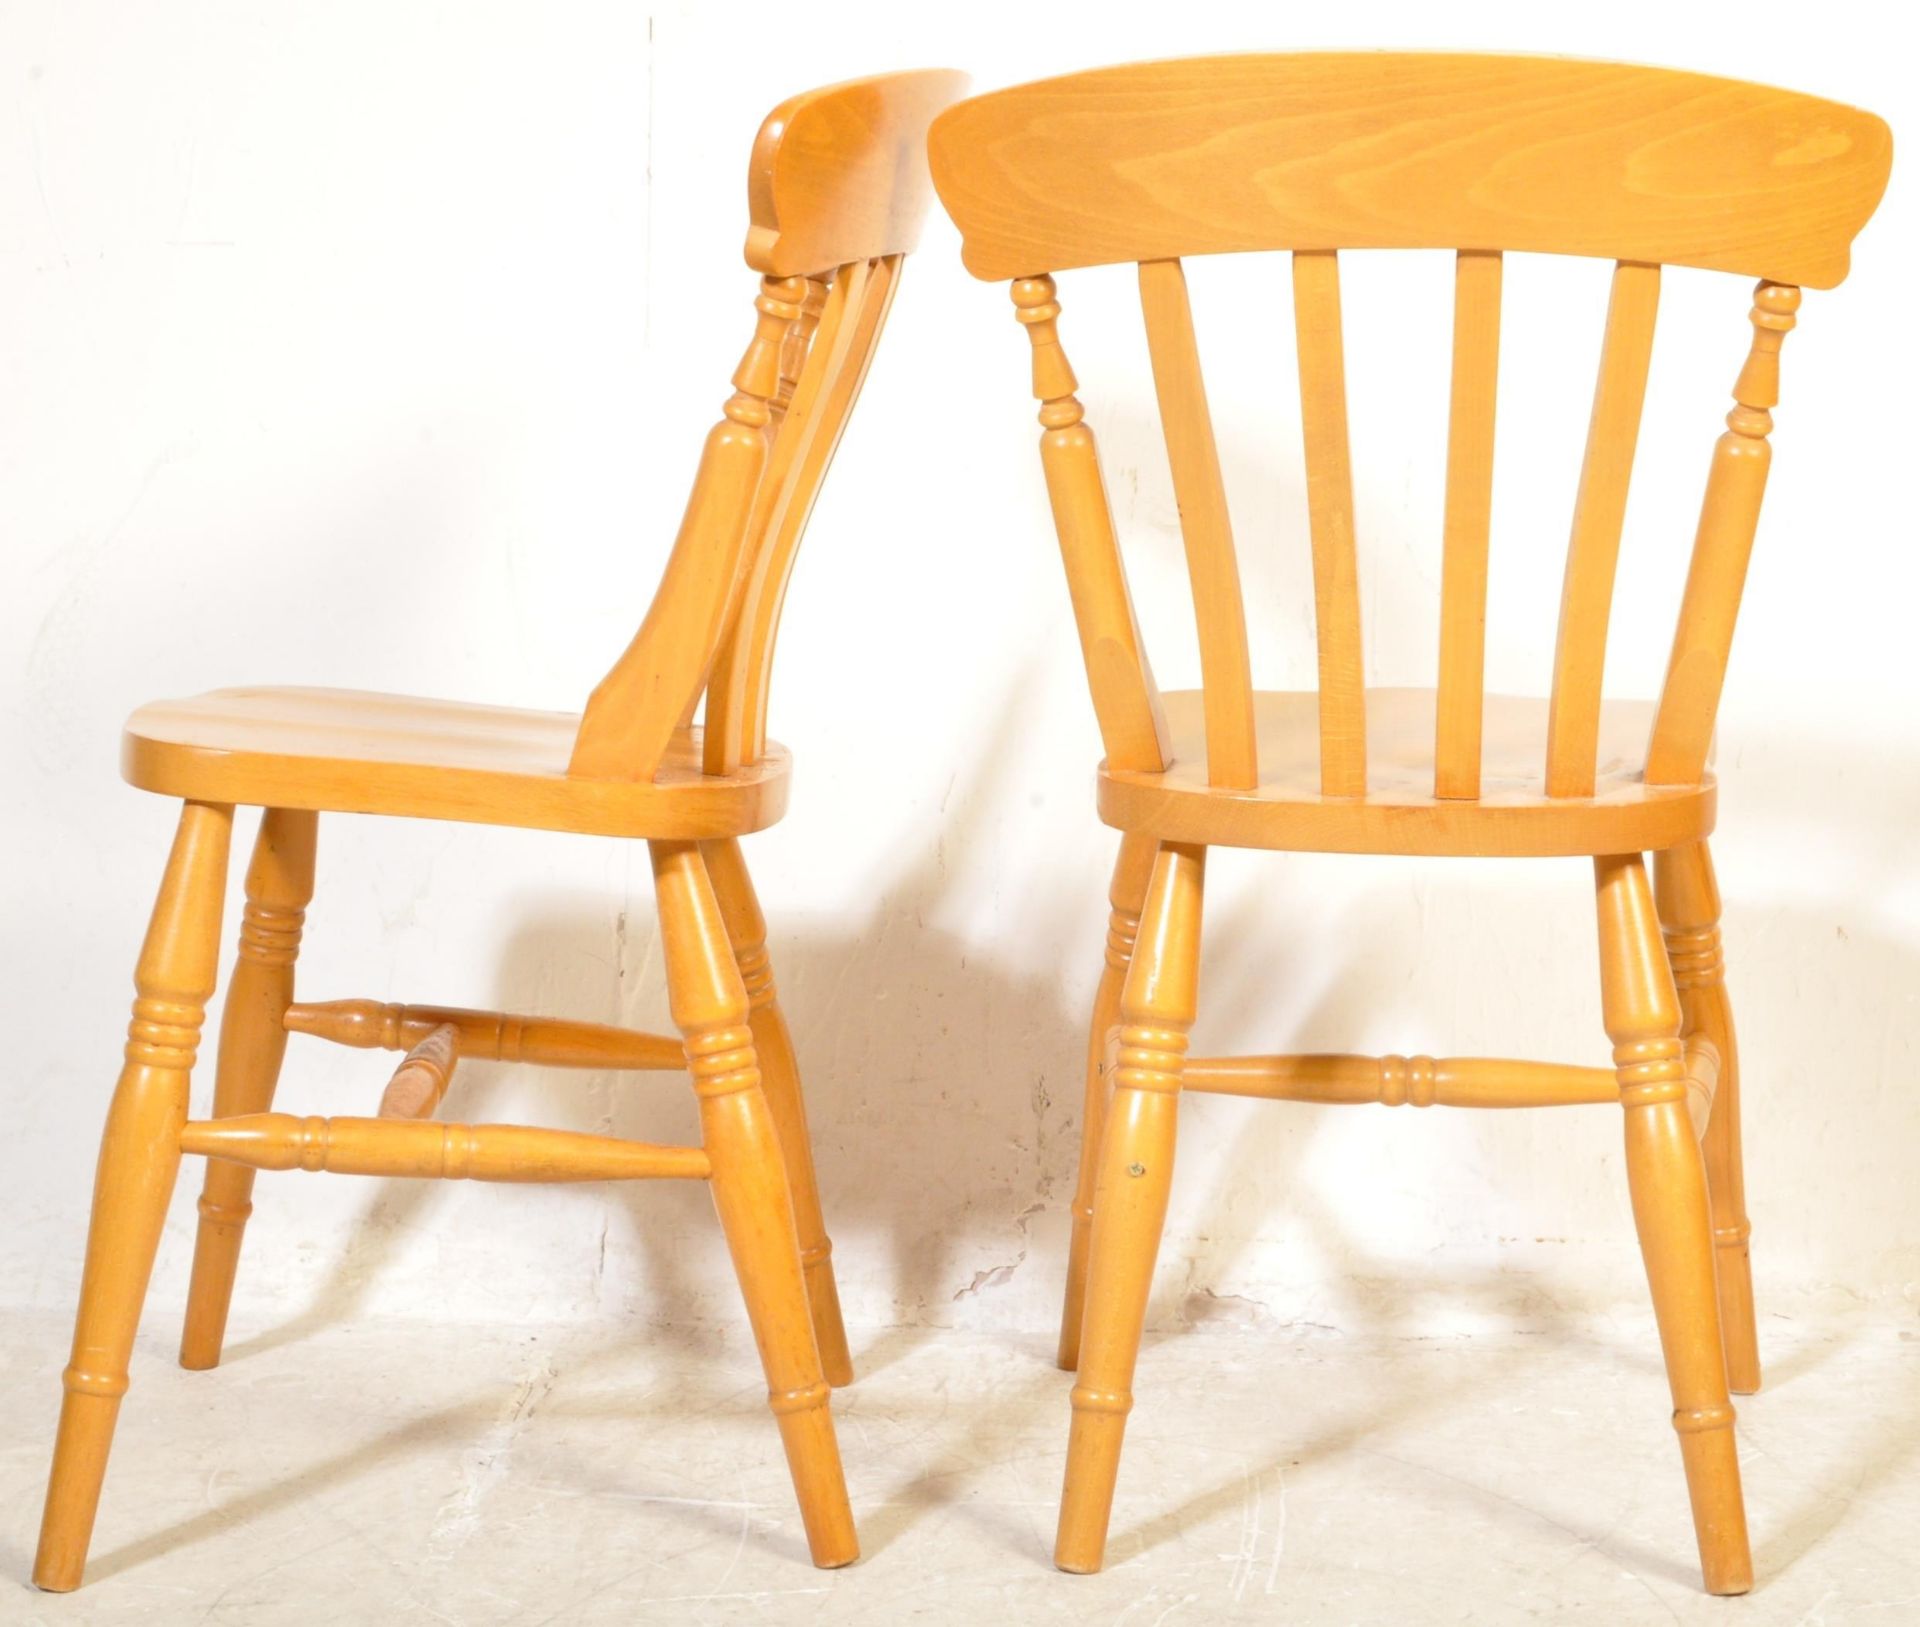 VICTORIAN STYLE COUNTRY CHUNKY OAK PINE TABLE & CHAIRS - Image 5 of 5